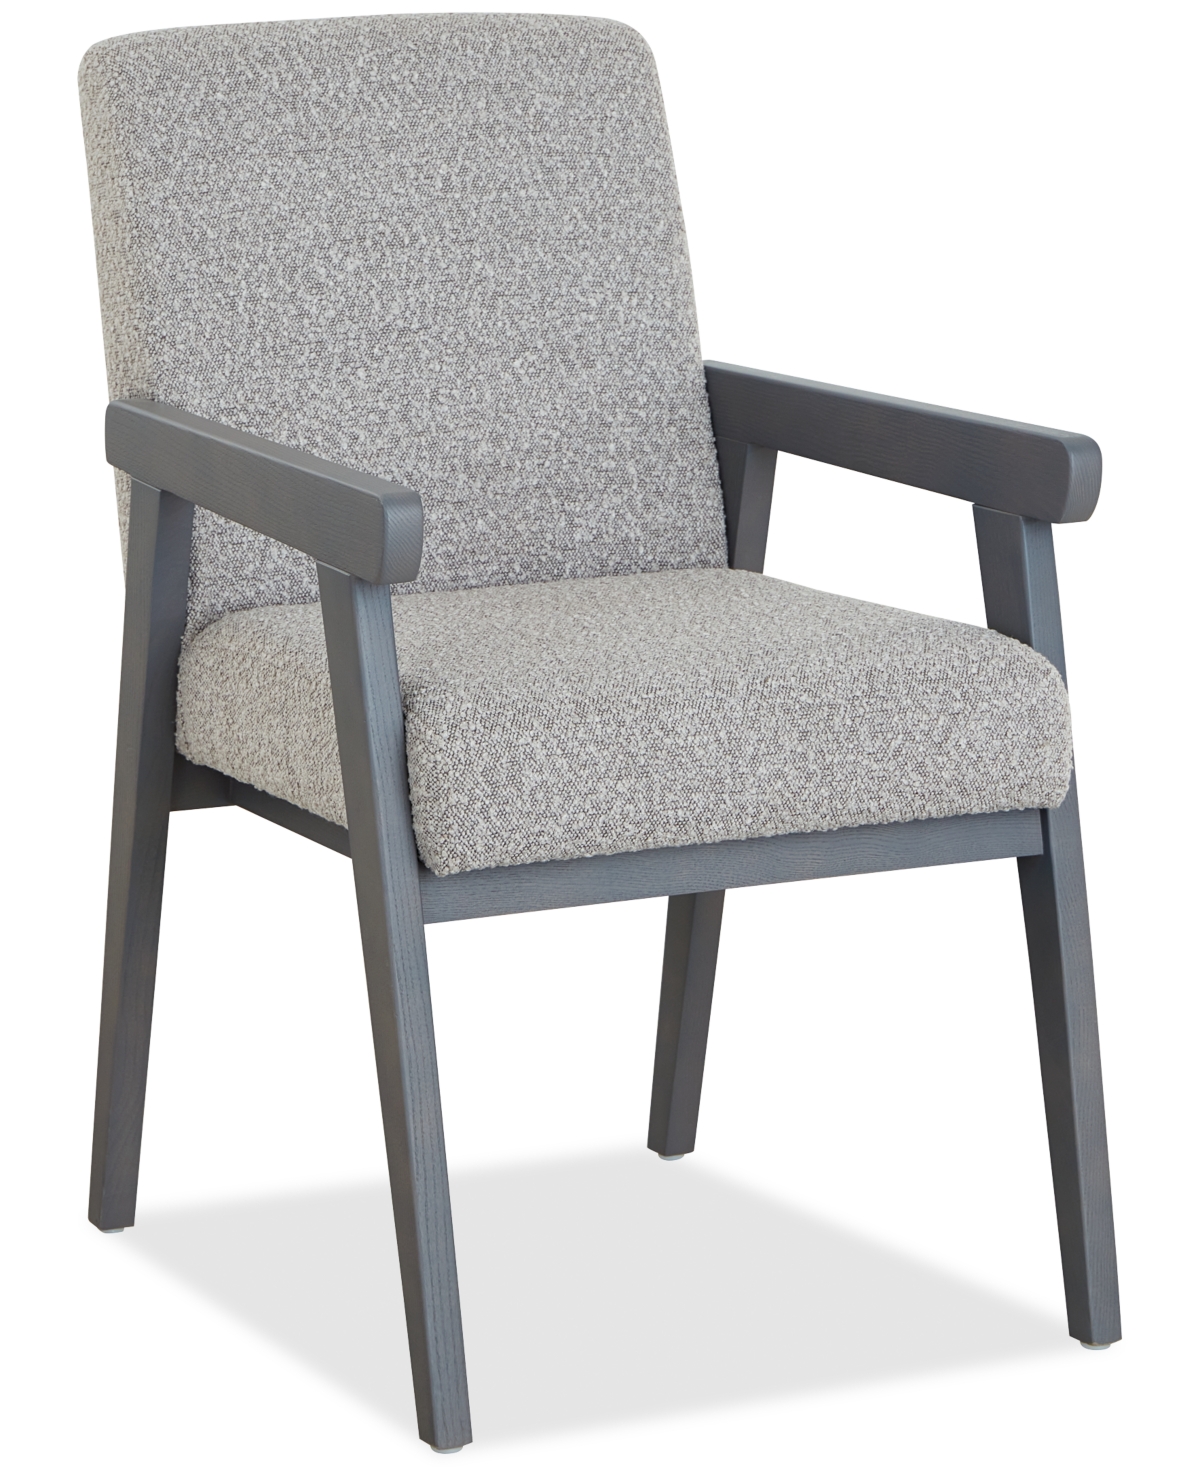 Drexel Atwell 4pc Arm Chair Set In No Color